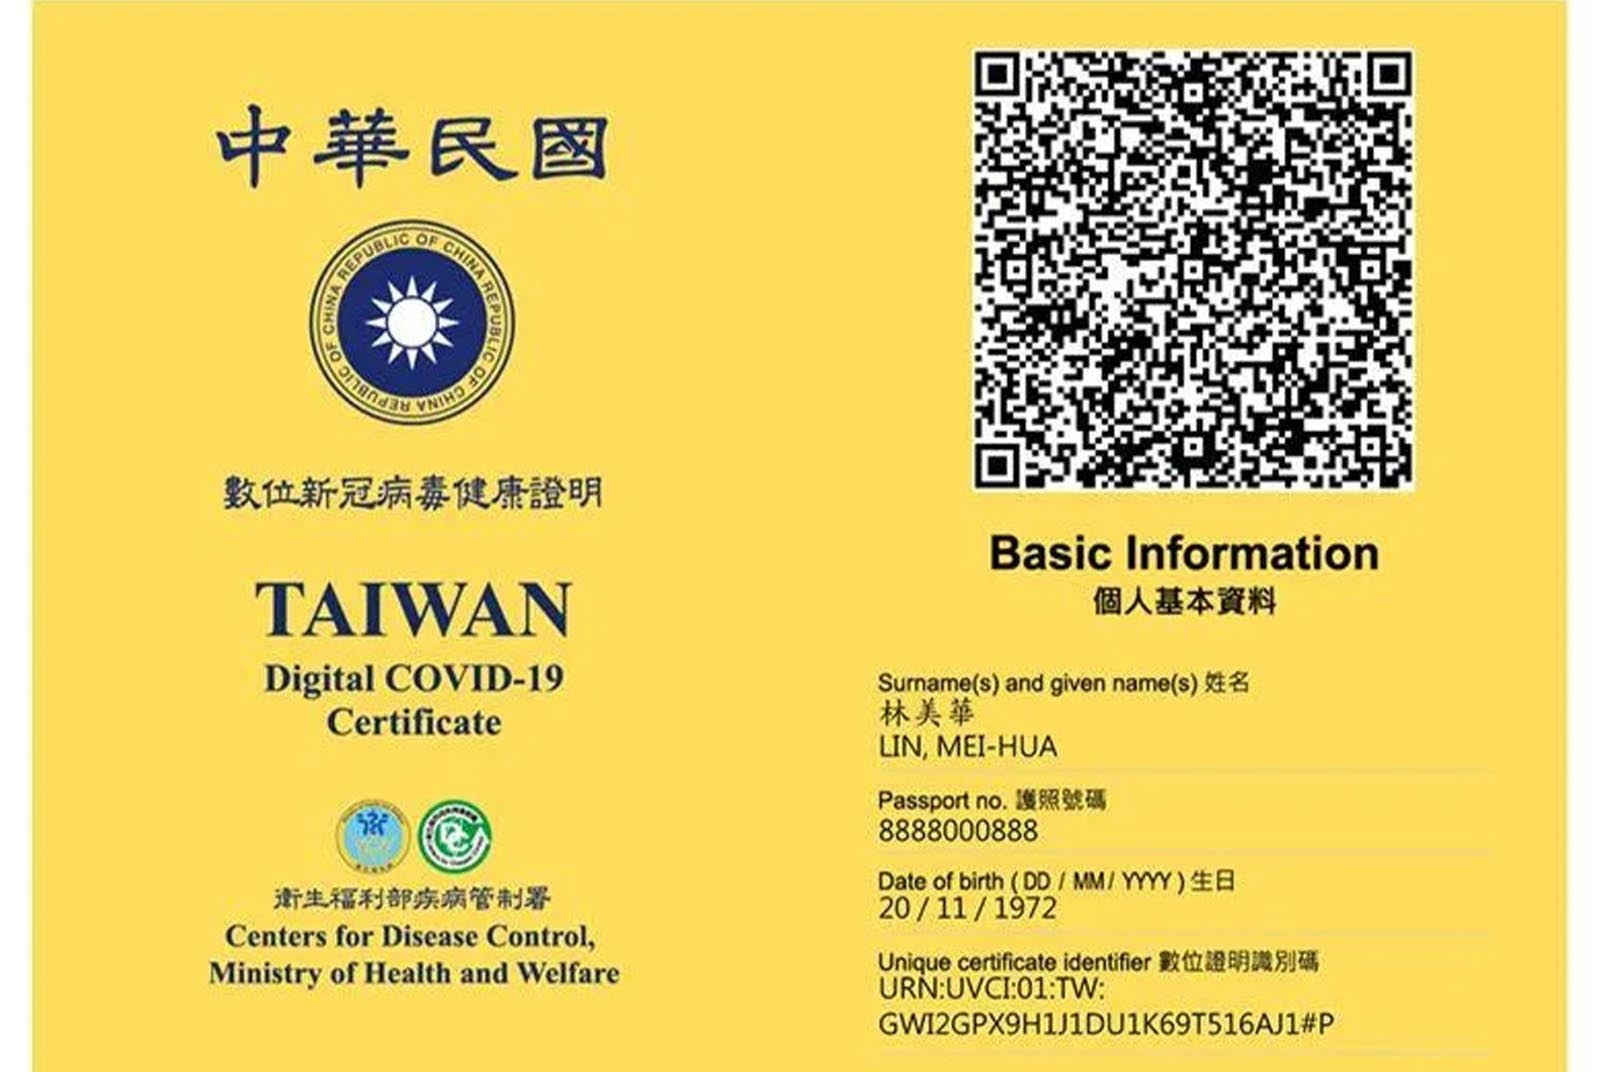 Taiwan's digital vaccination certificate is also recognized by the European Union. (Photo / Provided by CECC)